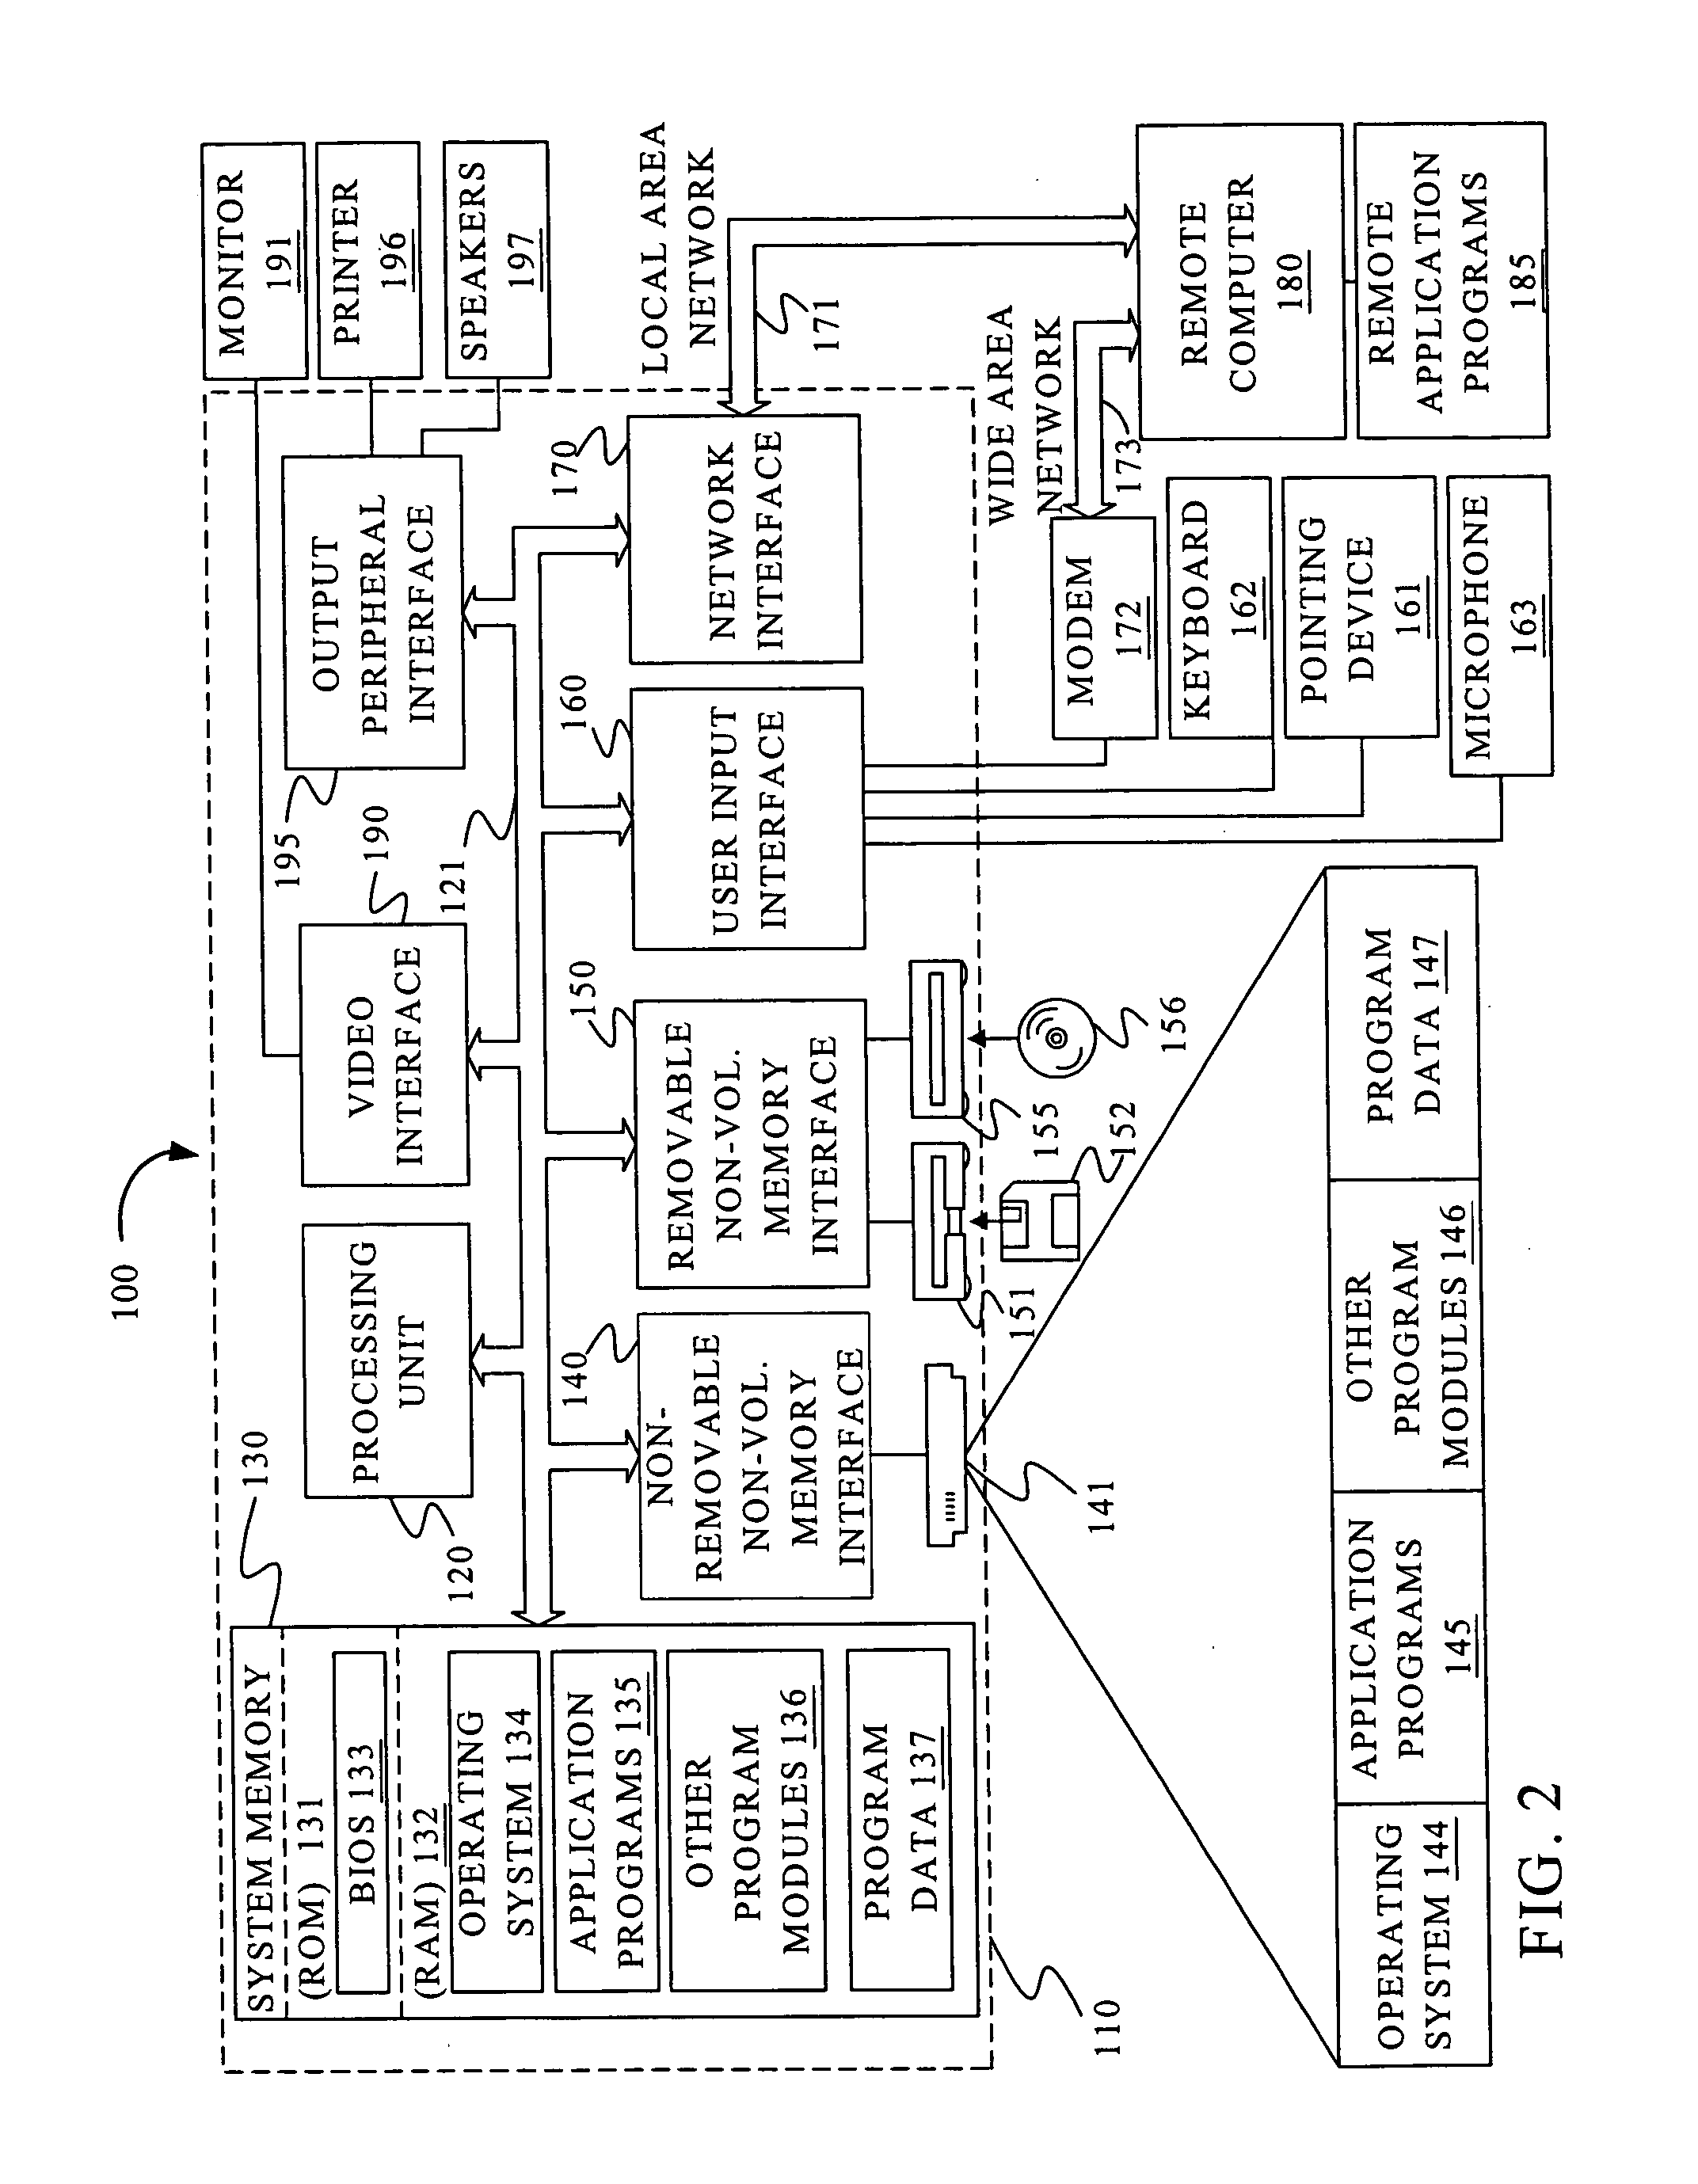 Dynamic filtering in a database system